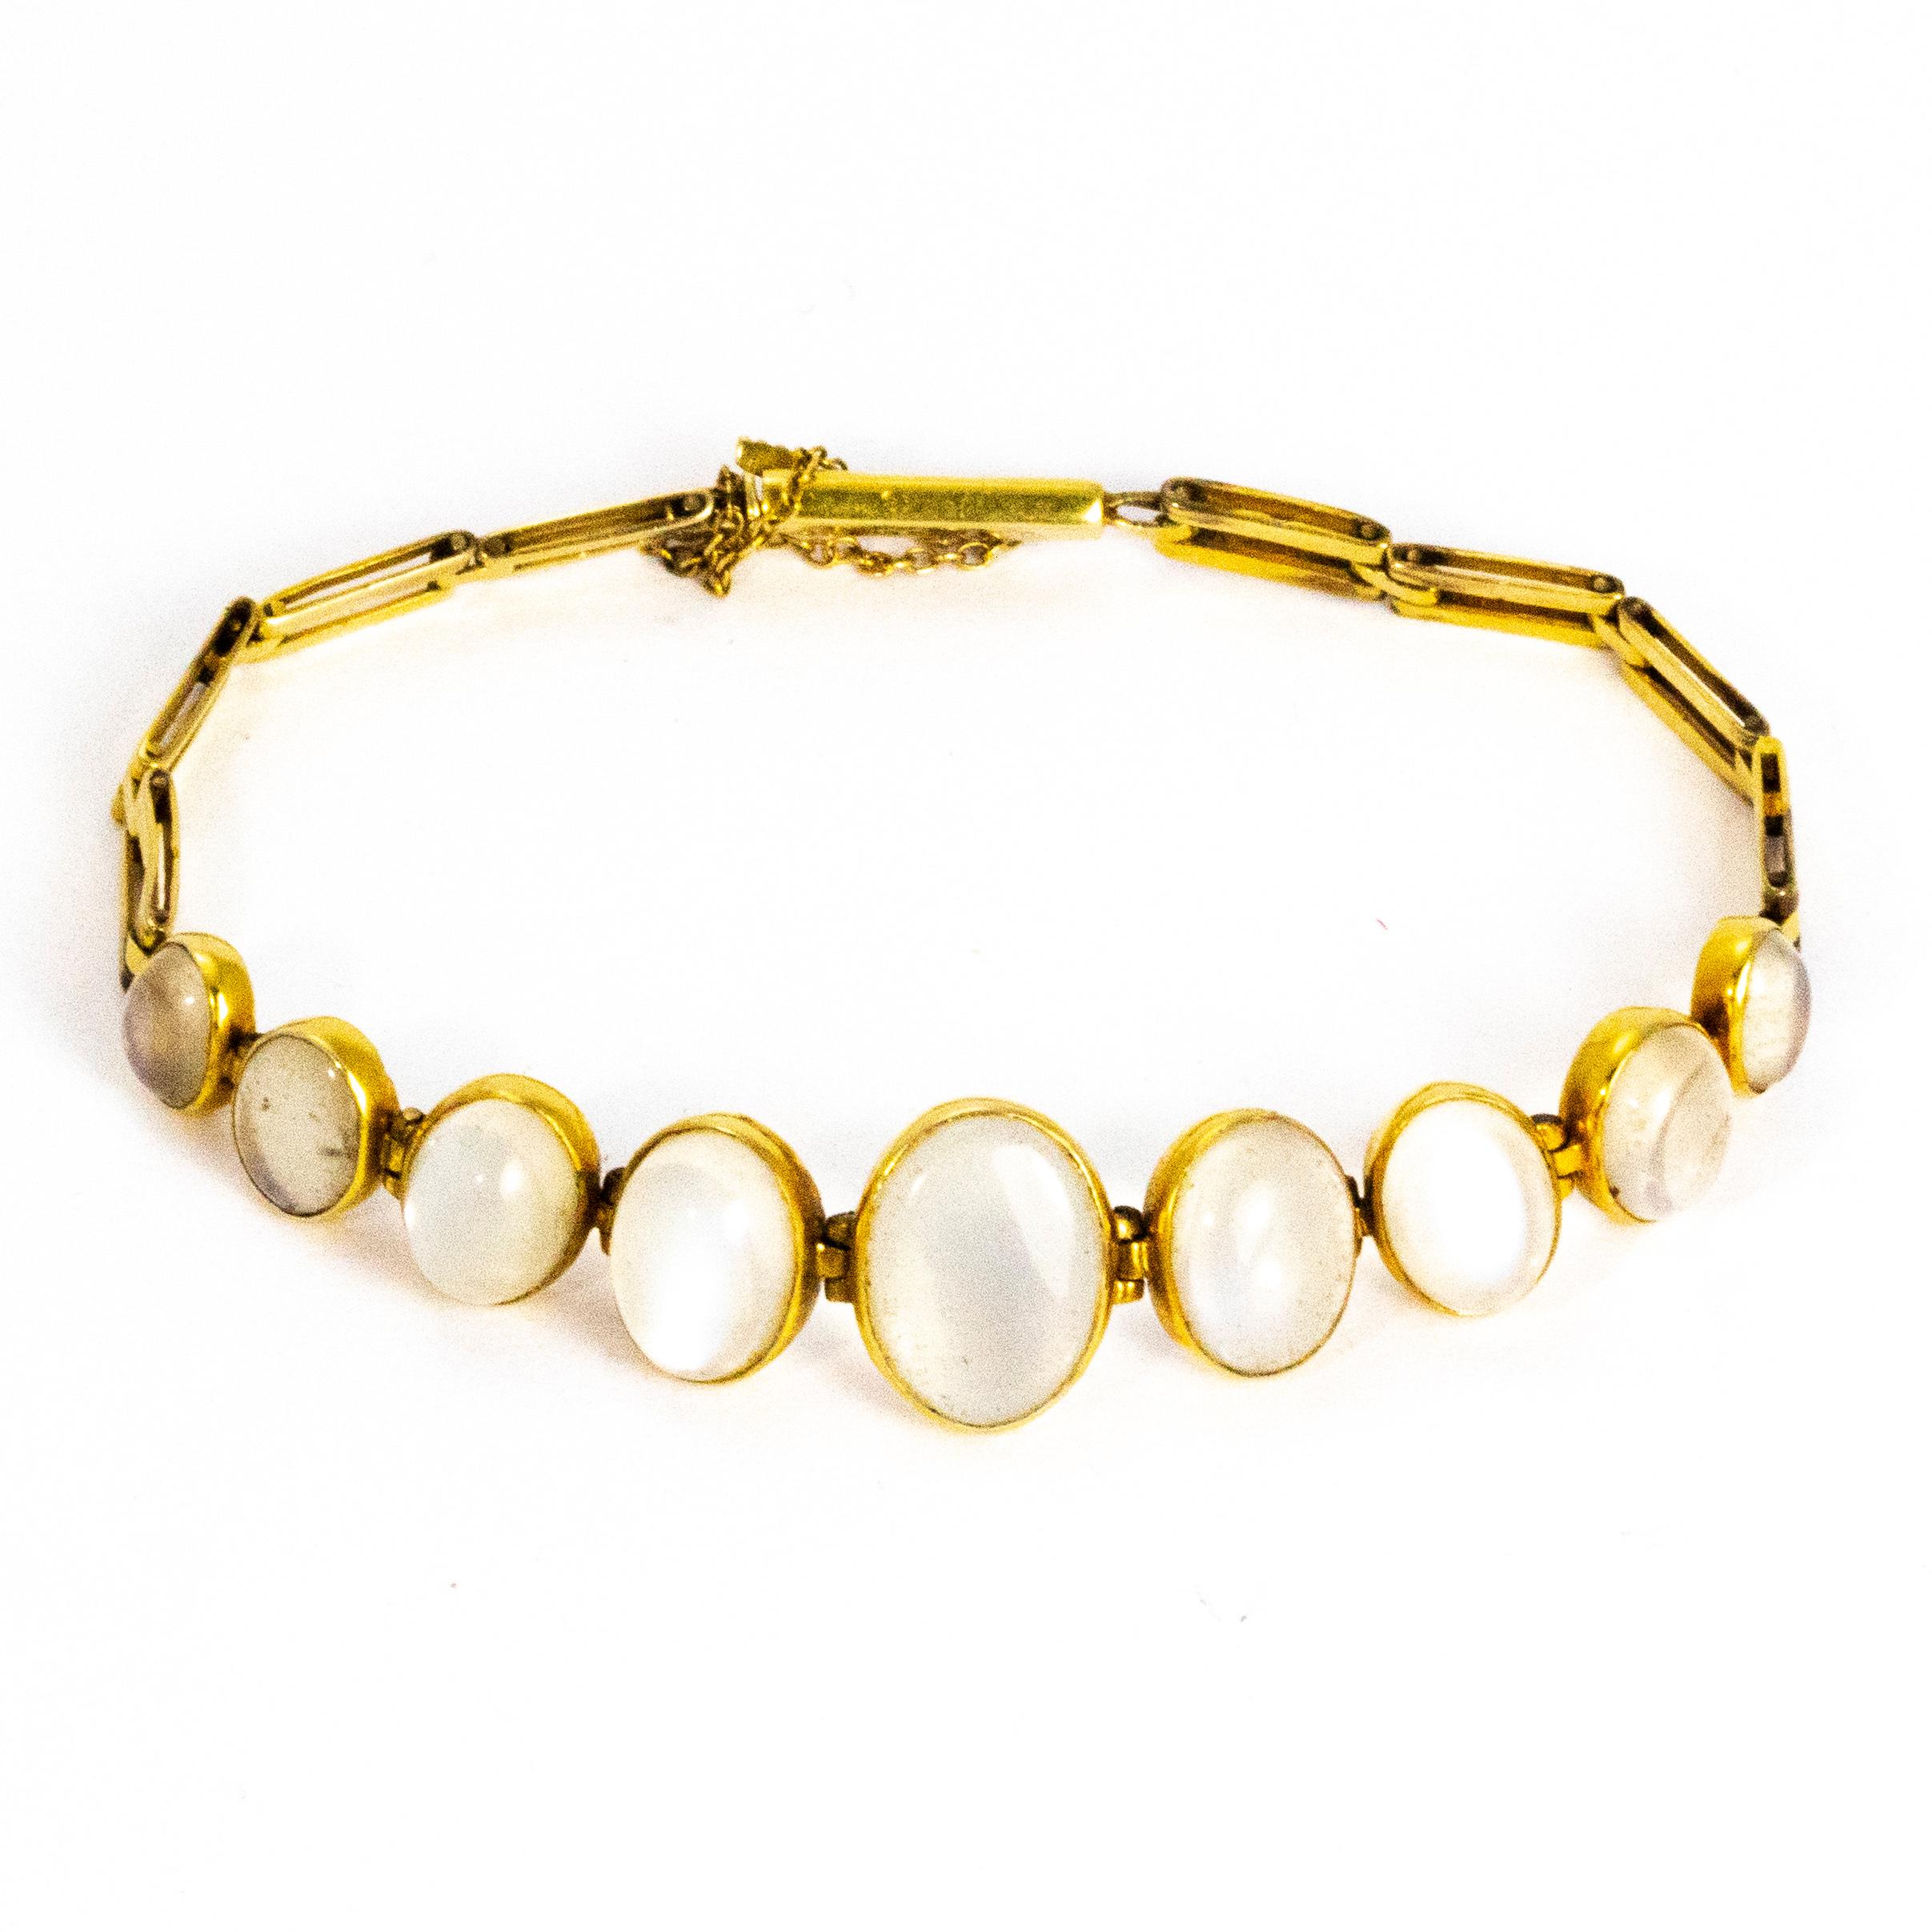 This wonderful bracelet holds 9 graduated moonstones and the chain is beautifully modern in style with its fence like links. 

Bracelet length: 6inches 